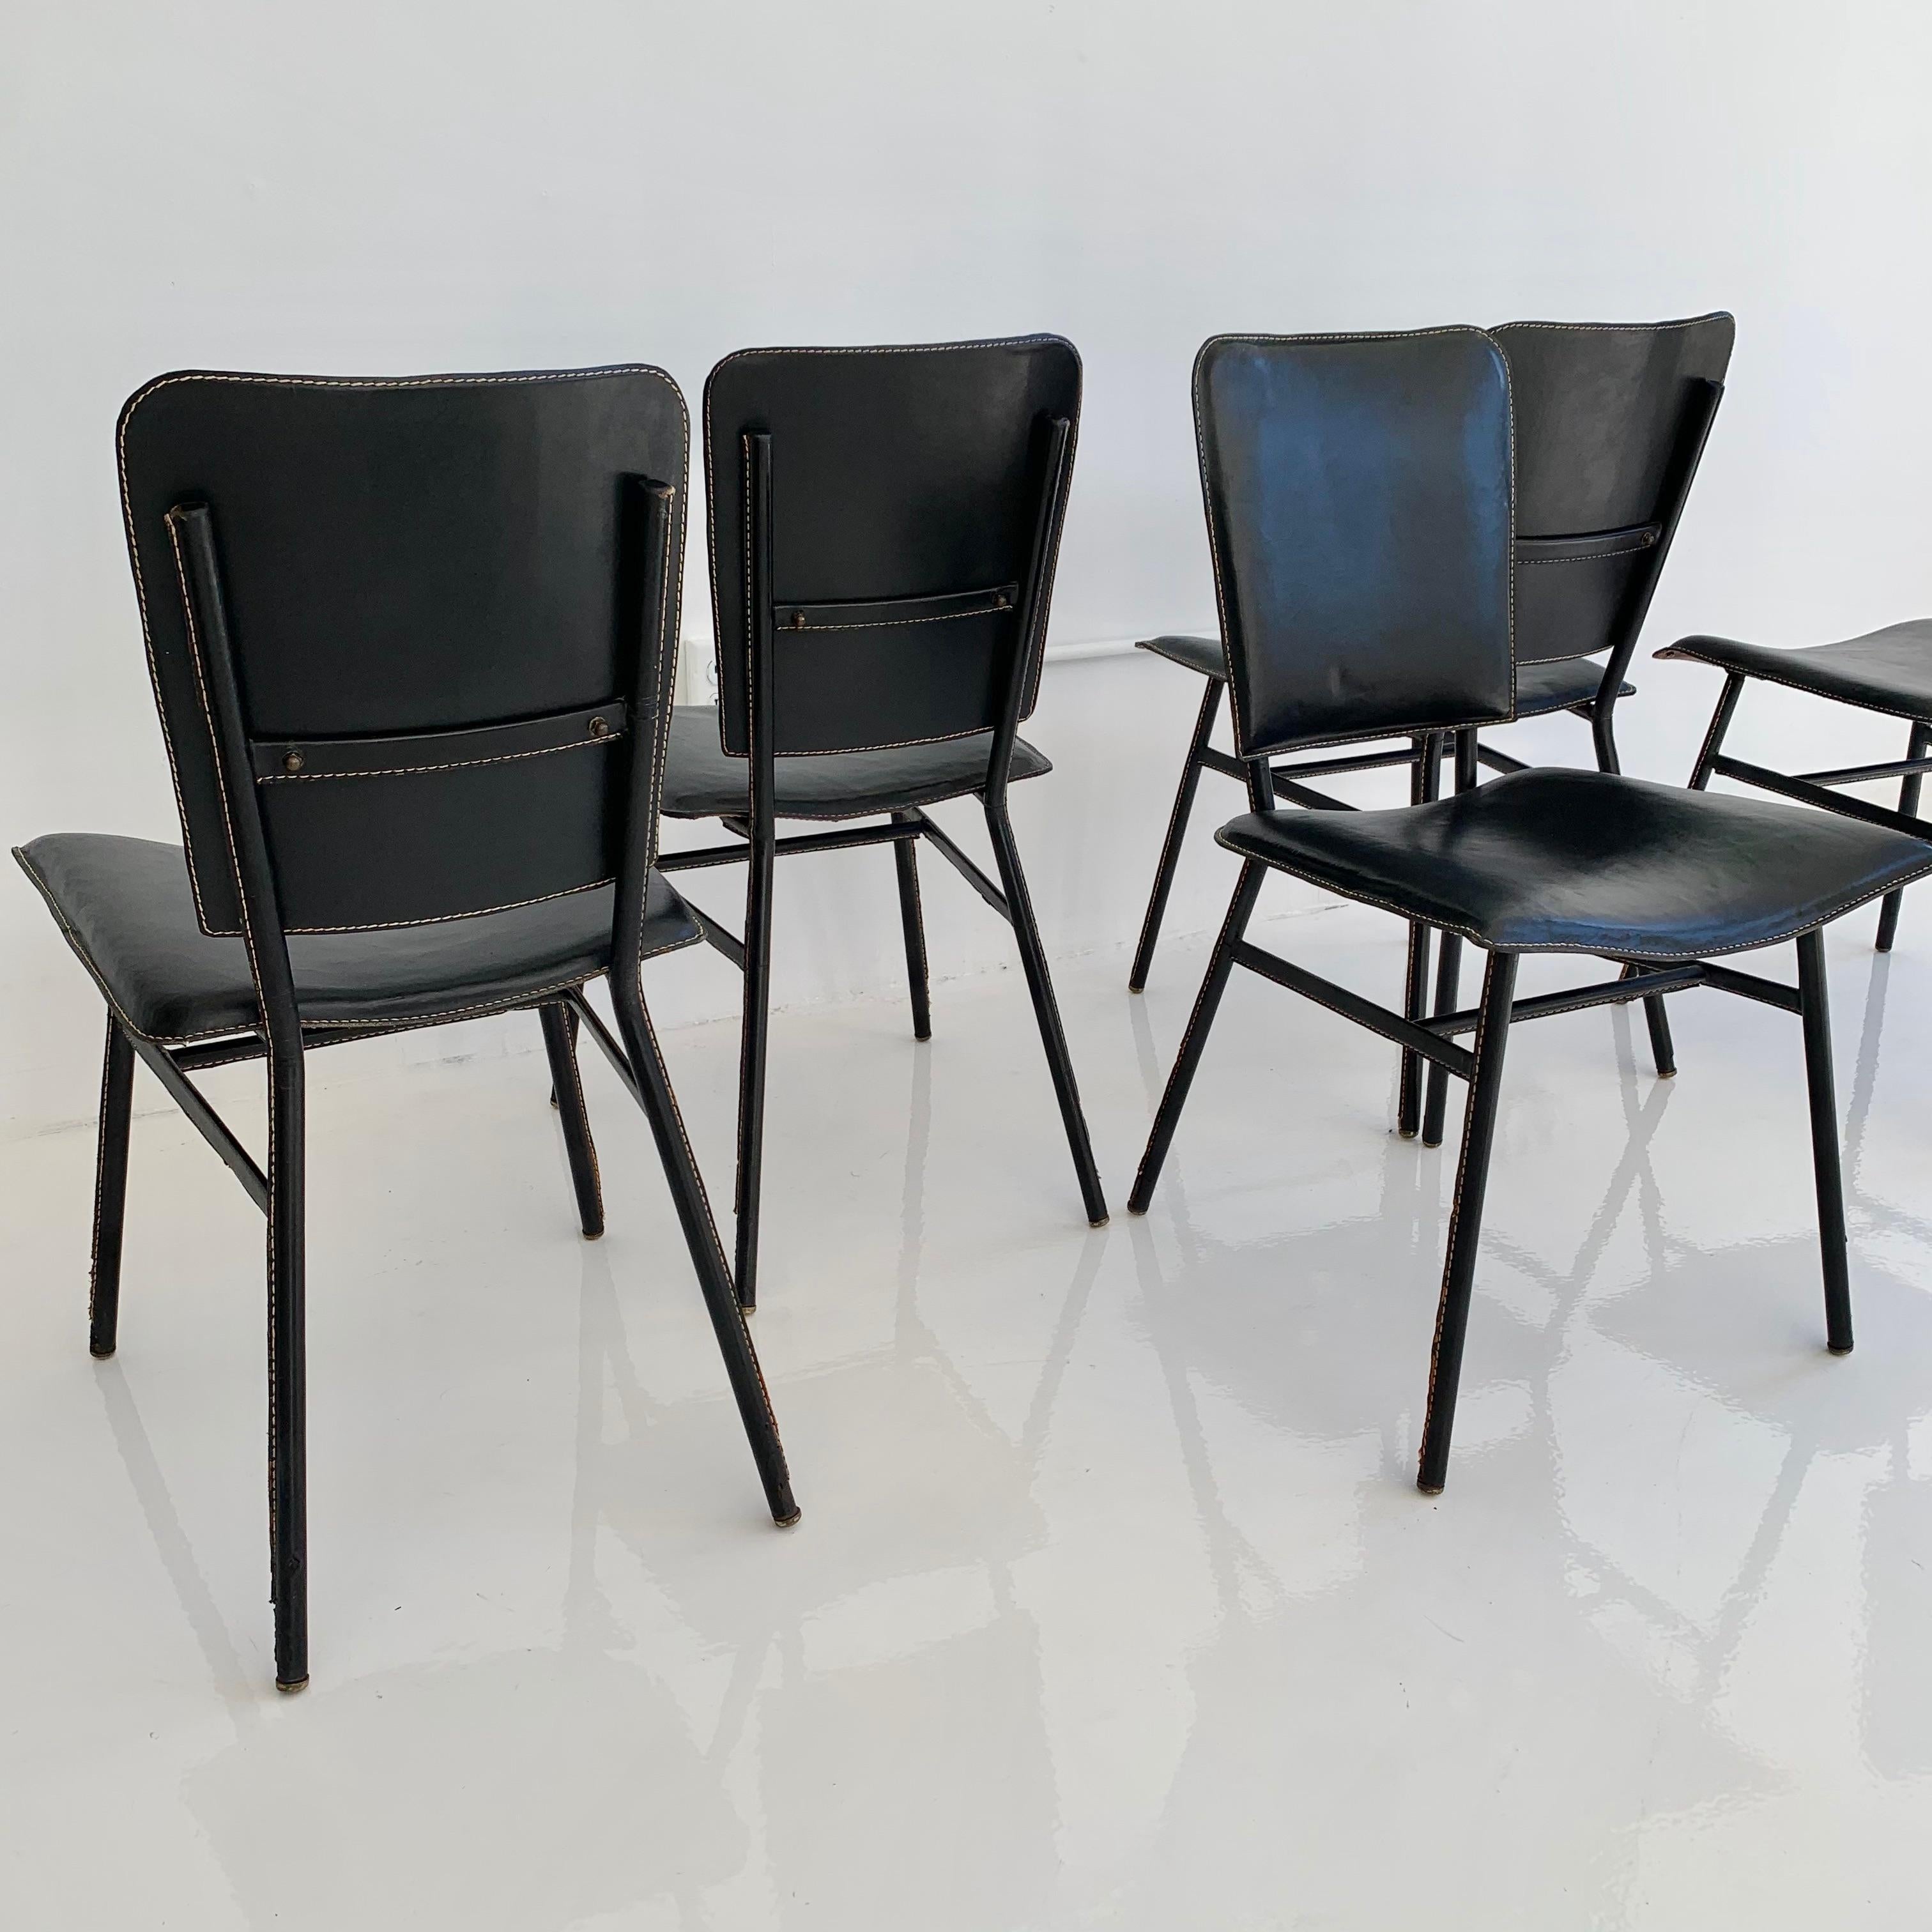 Jacques Adnet Leather Dining Table and 5 Leather Chairs, 1950s france 8